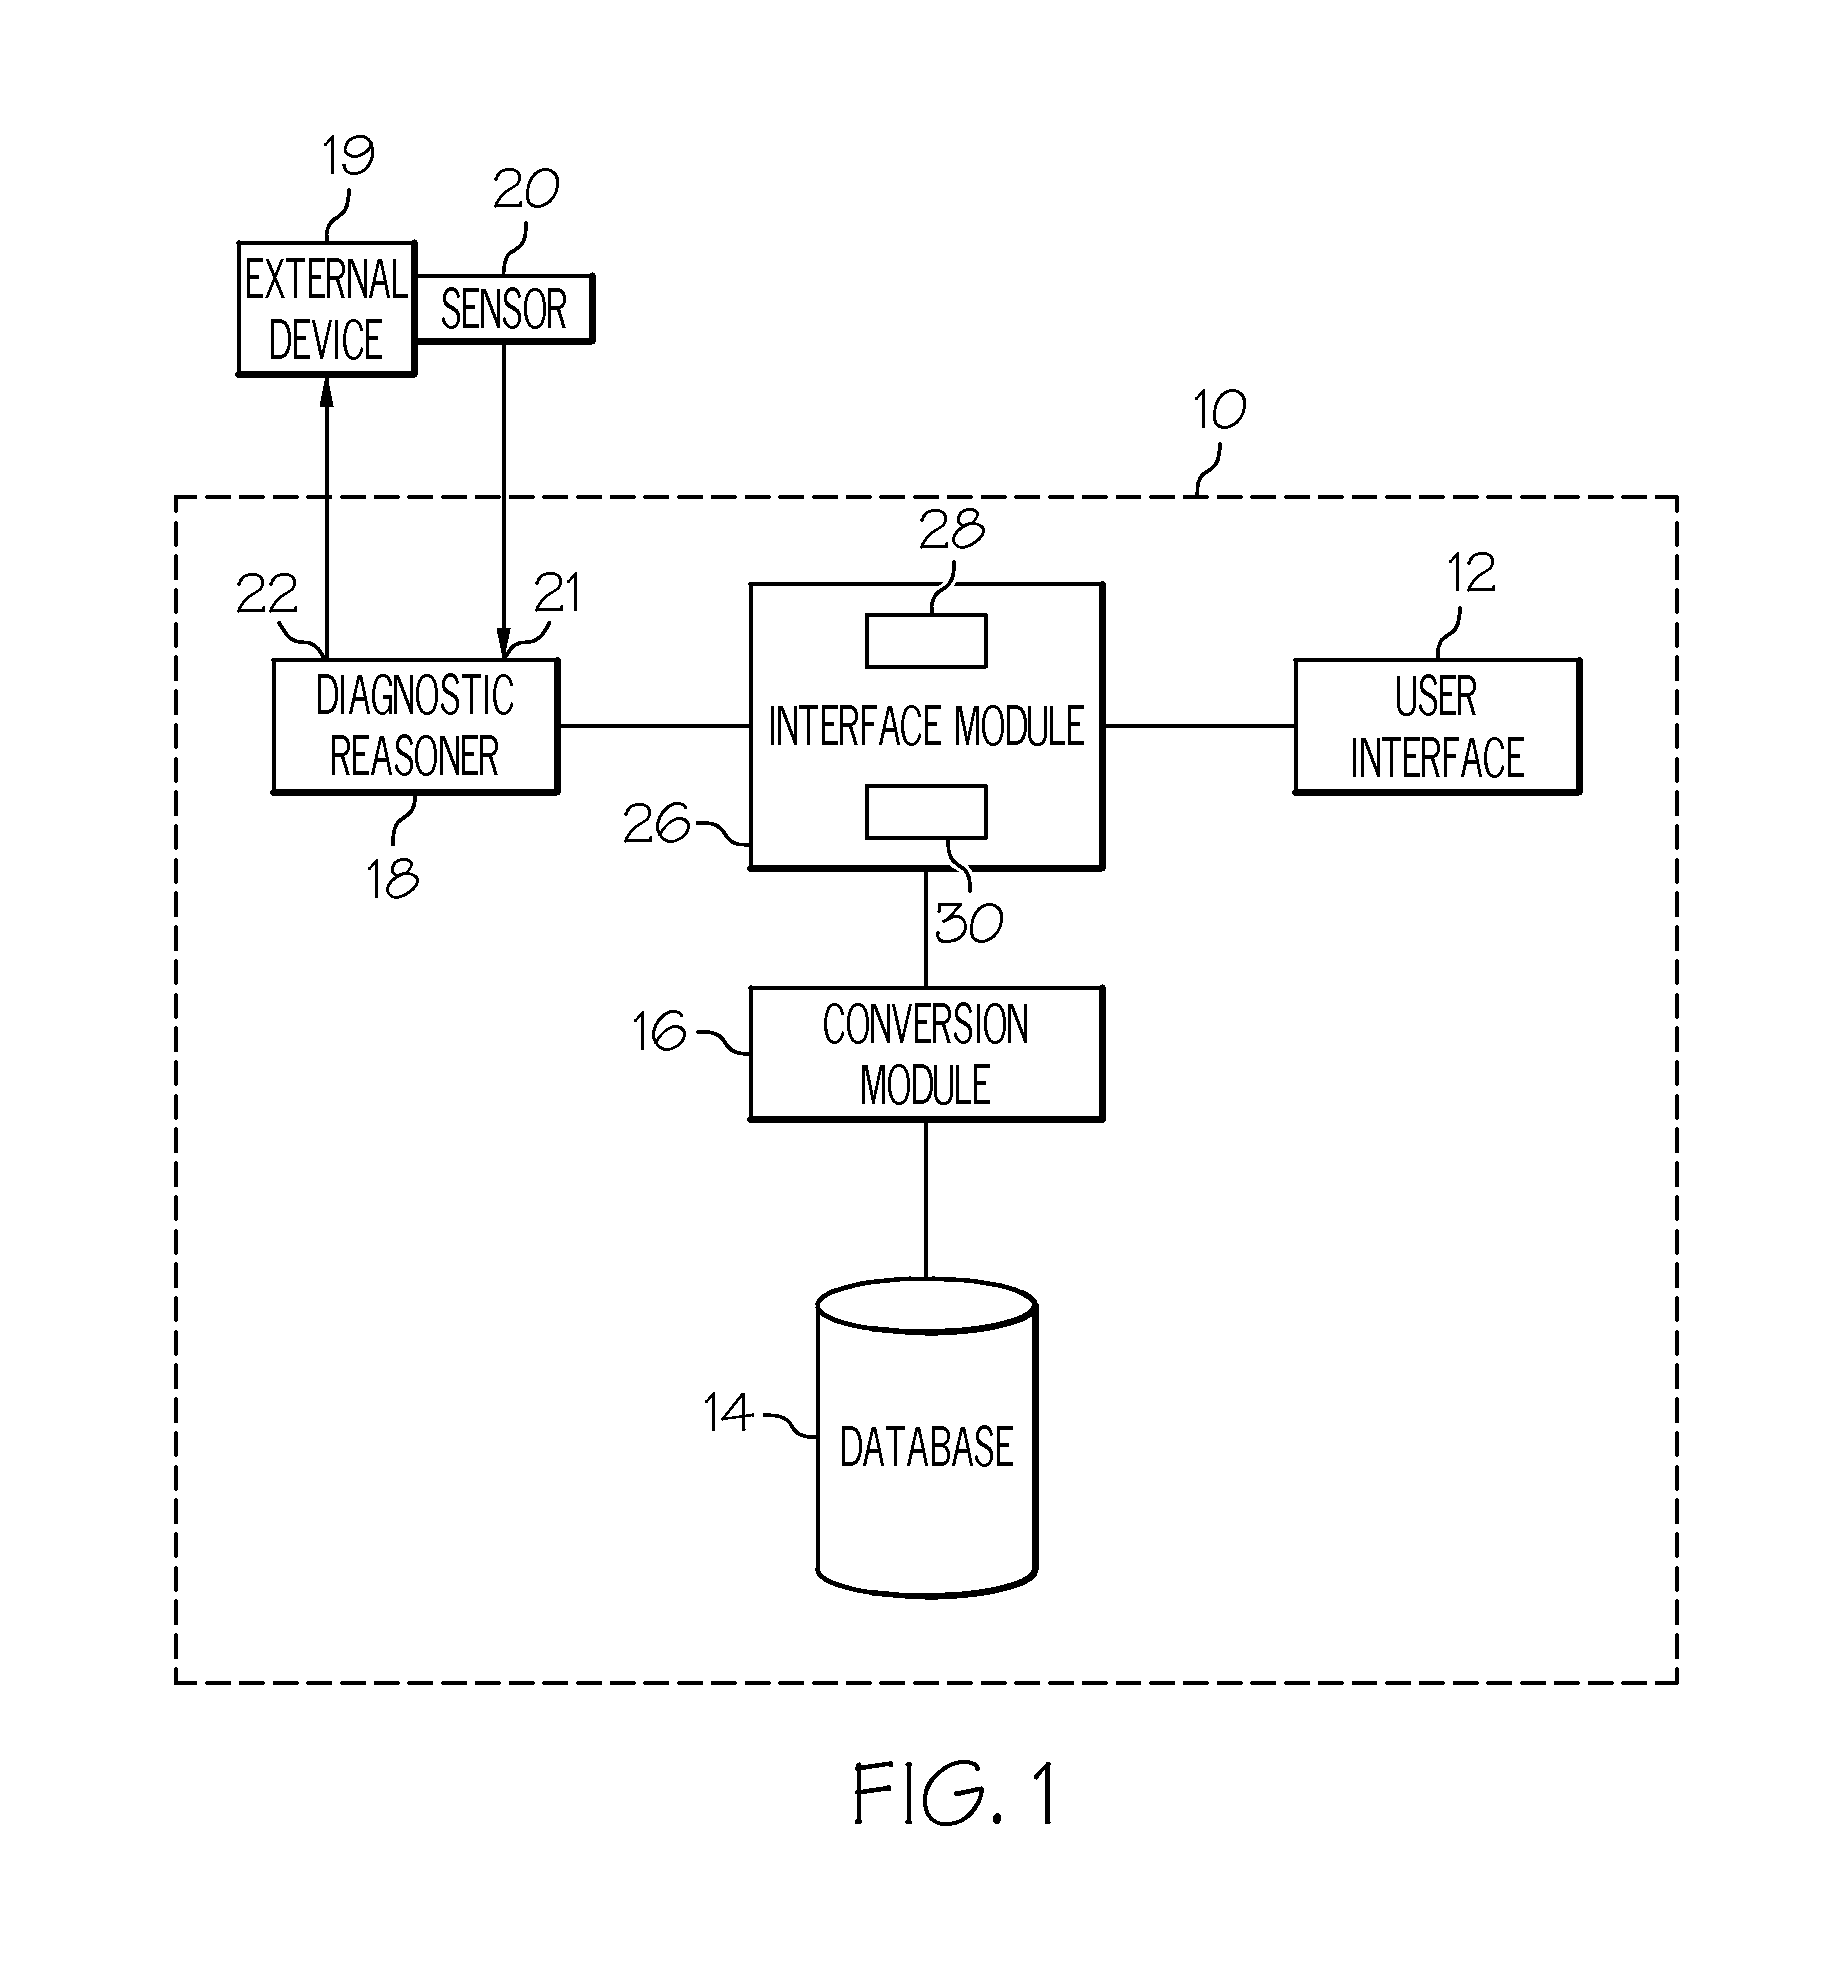 Interactive electronic technical manual system and method